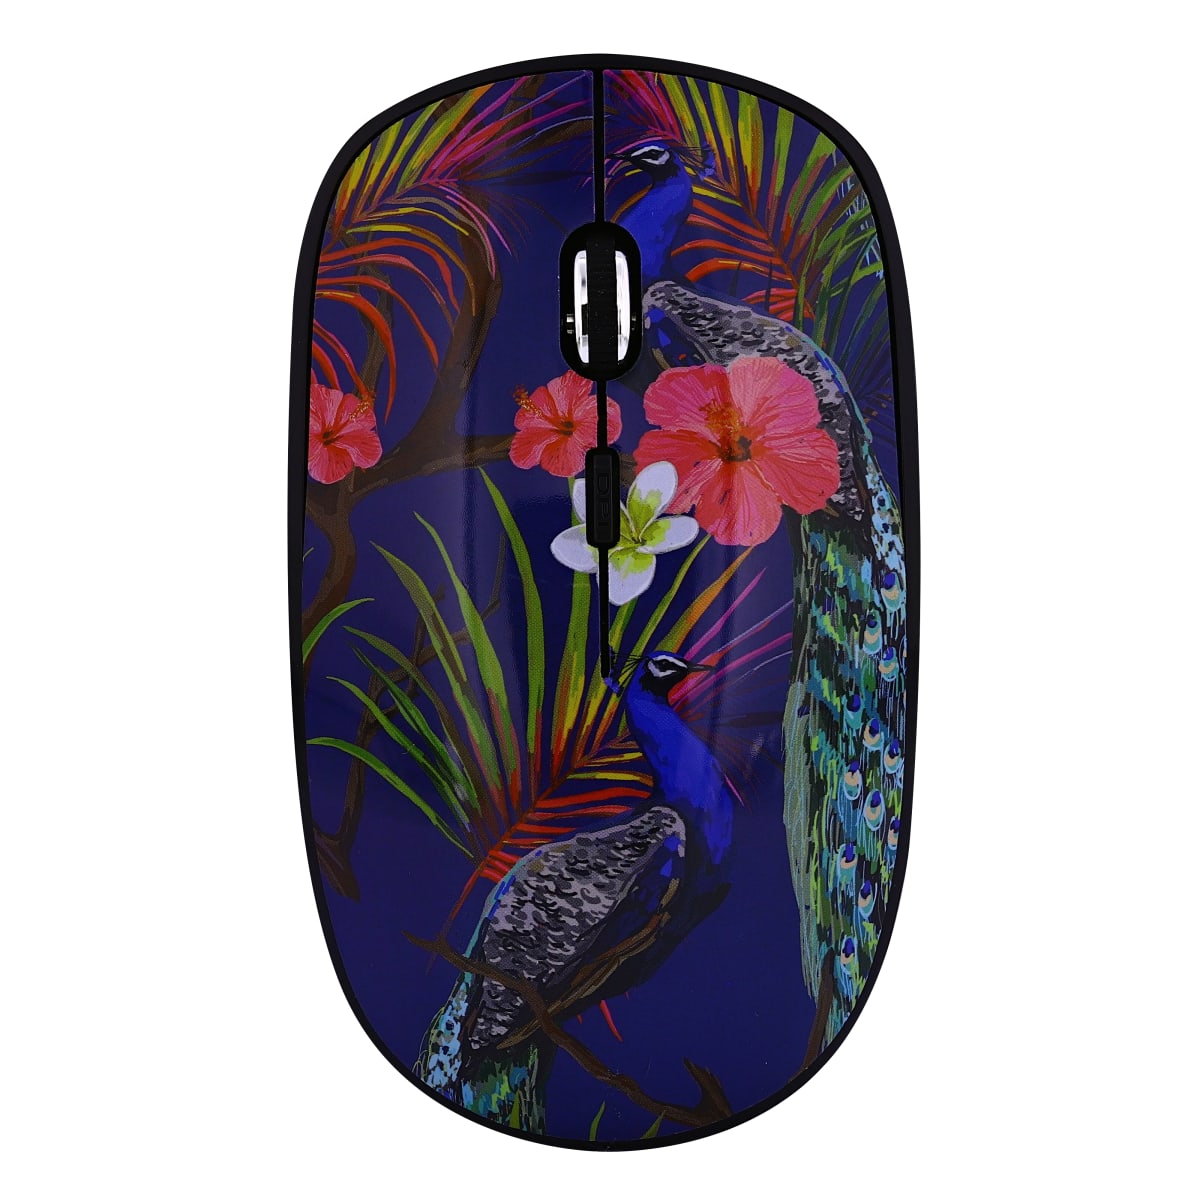 COPACABANA wireless mouse - EXCLUSIV' COLLECTION